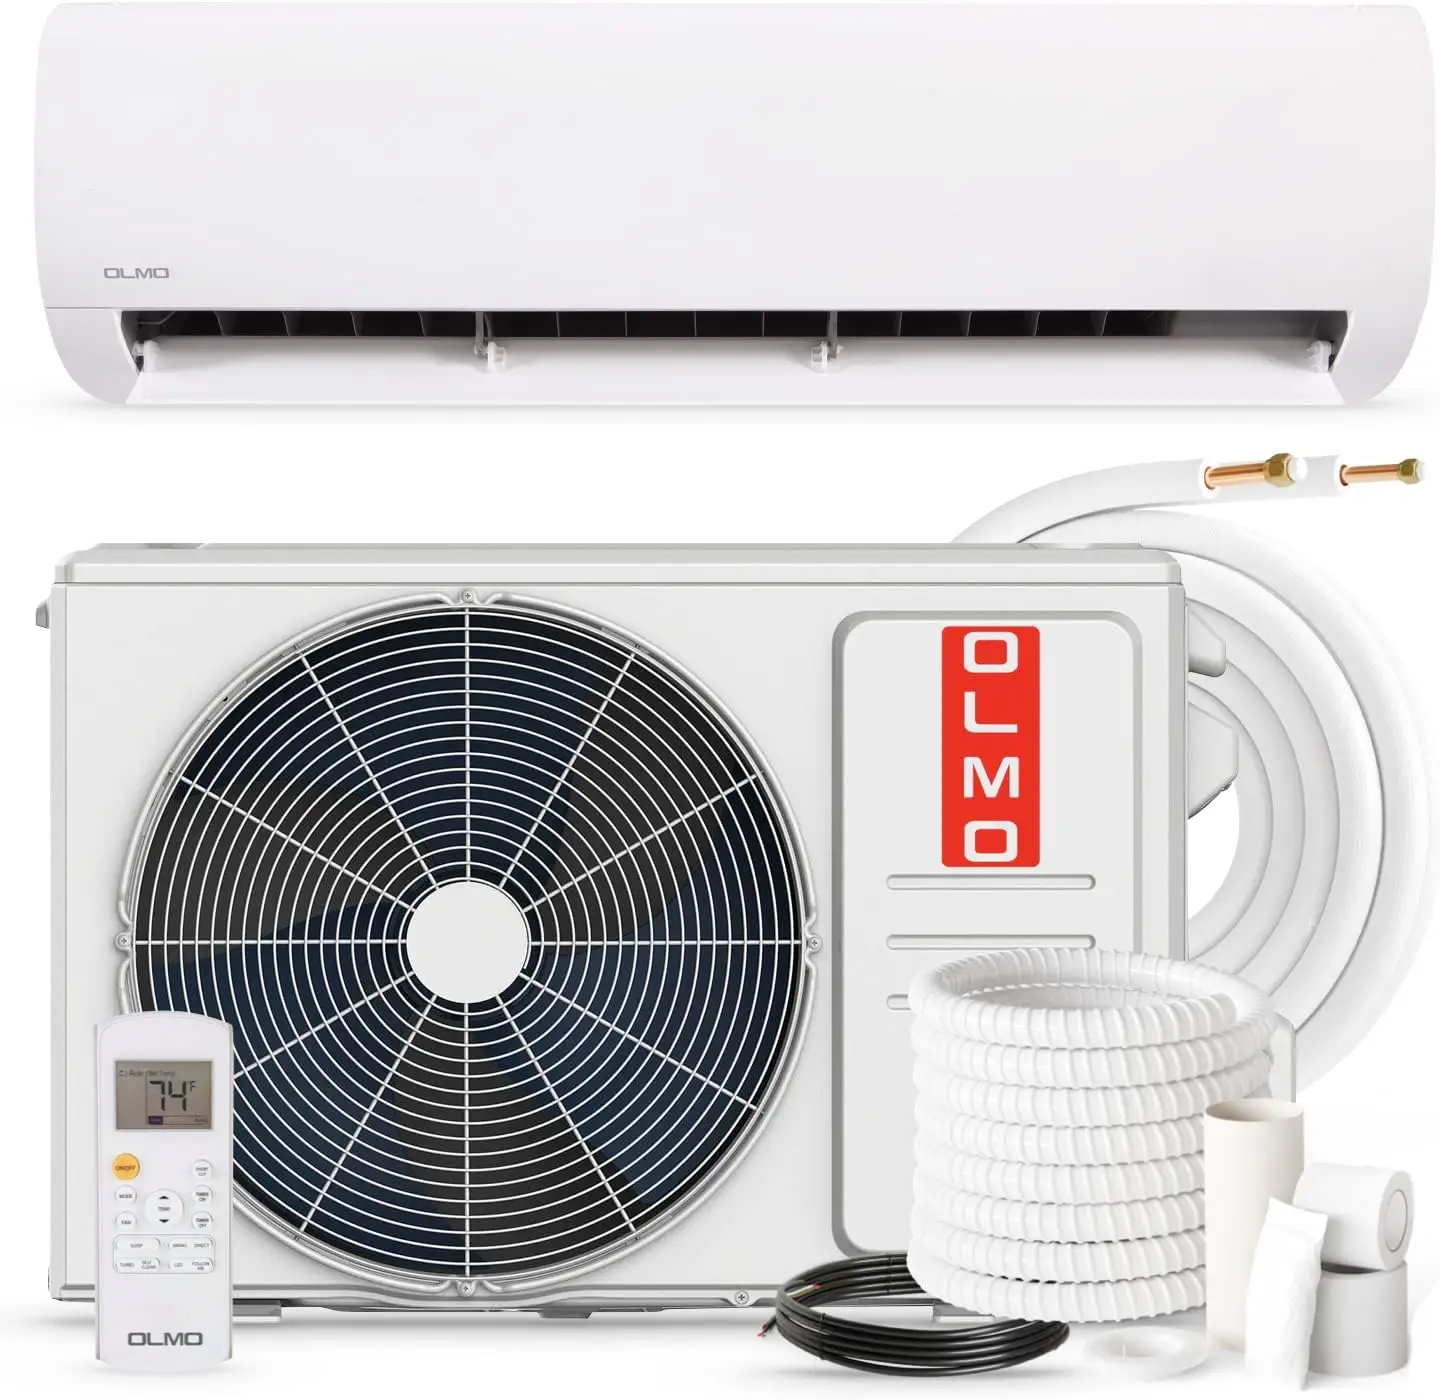 

Alpic 12,000 BTU, 110/120V, 17.4 SEER2, Pre-charged Ductless Mini Split Air Conditioner with Heat Pump Including 16ft